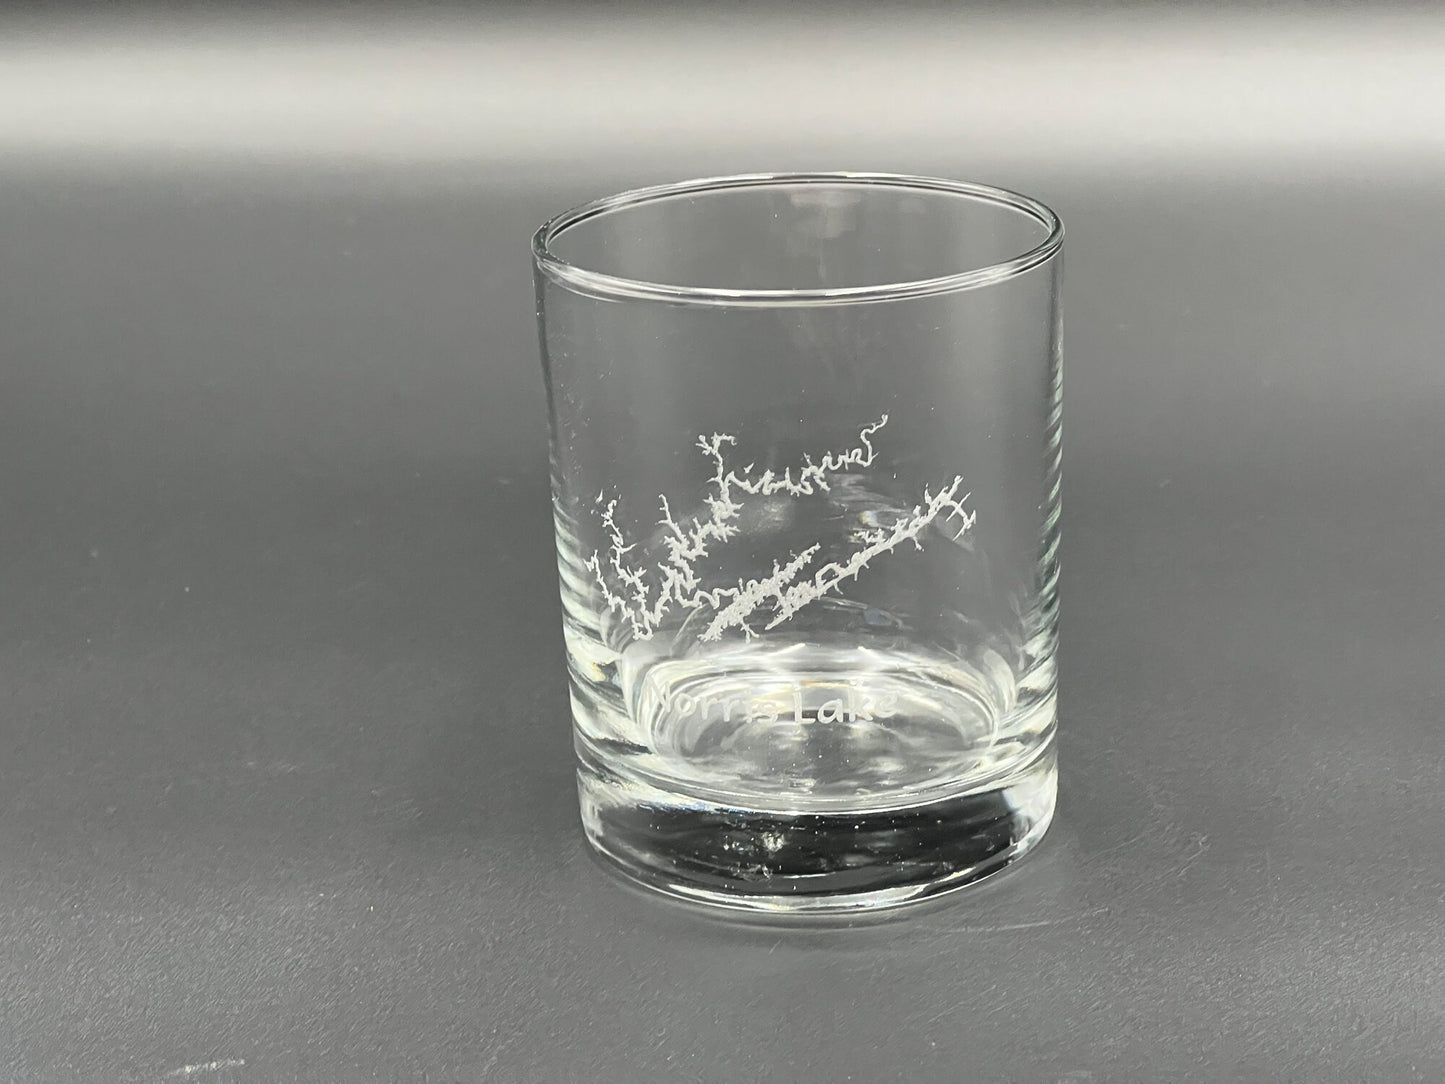 Norris Lake Tennessee - Etched 12.25 oz Double Rocks Glass